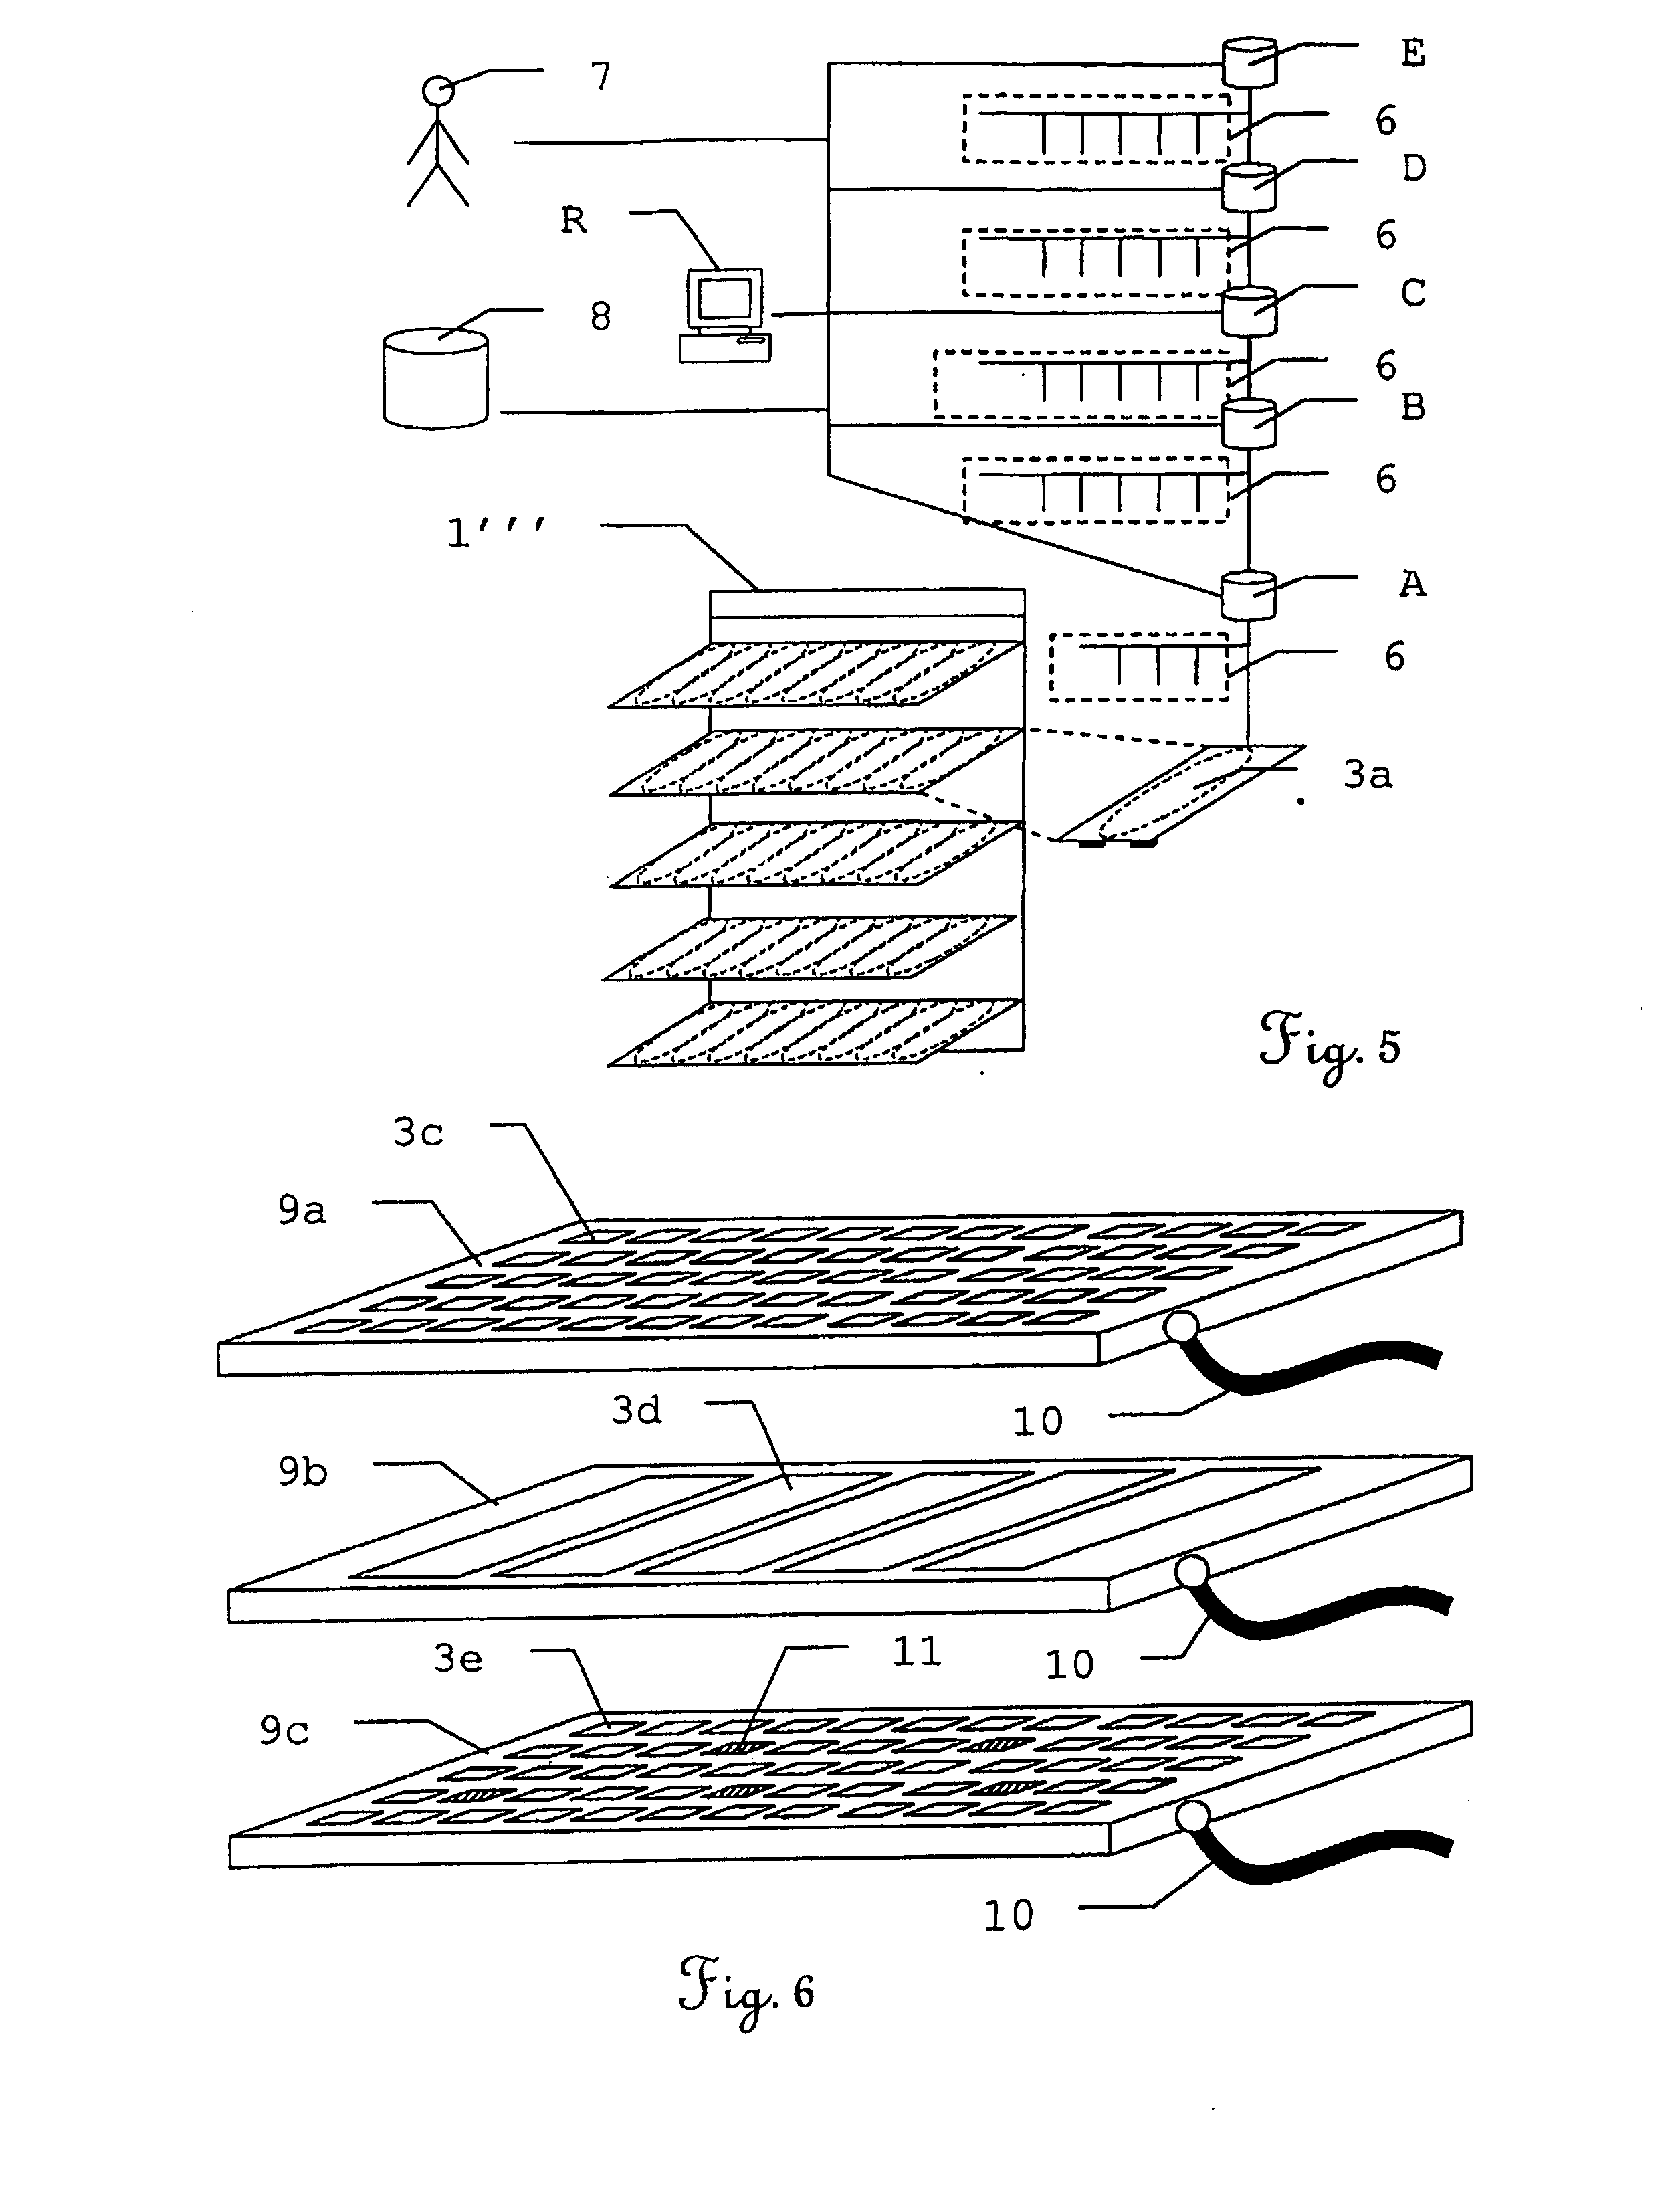 Stocking system and method for managing stocking